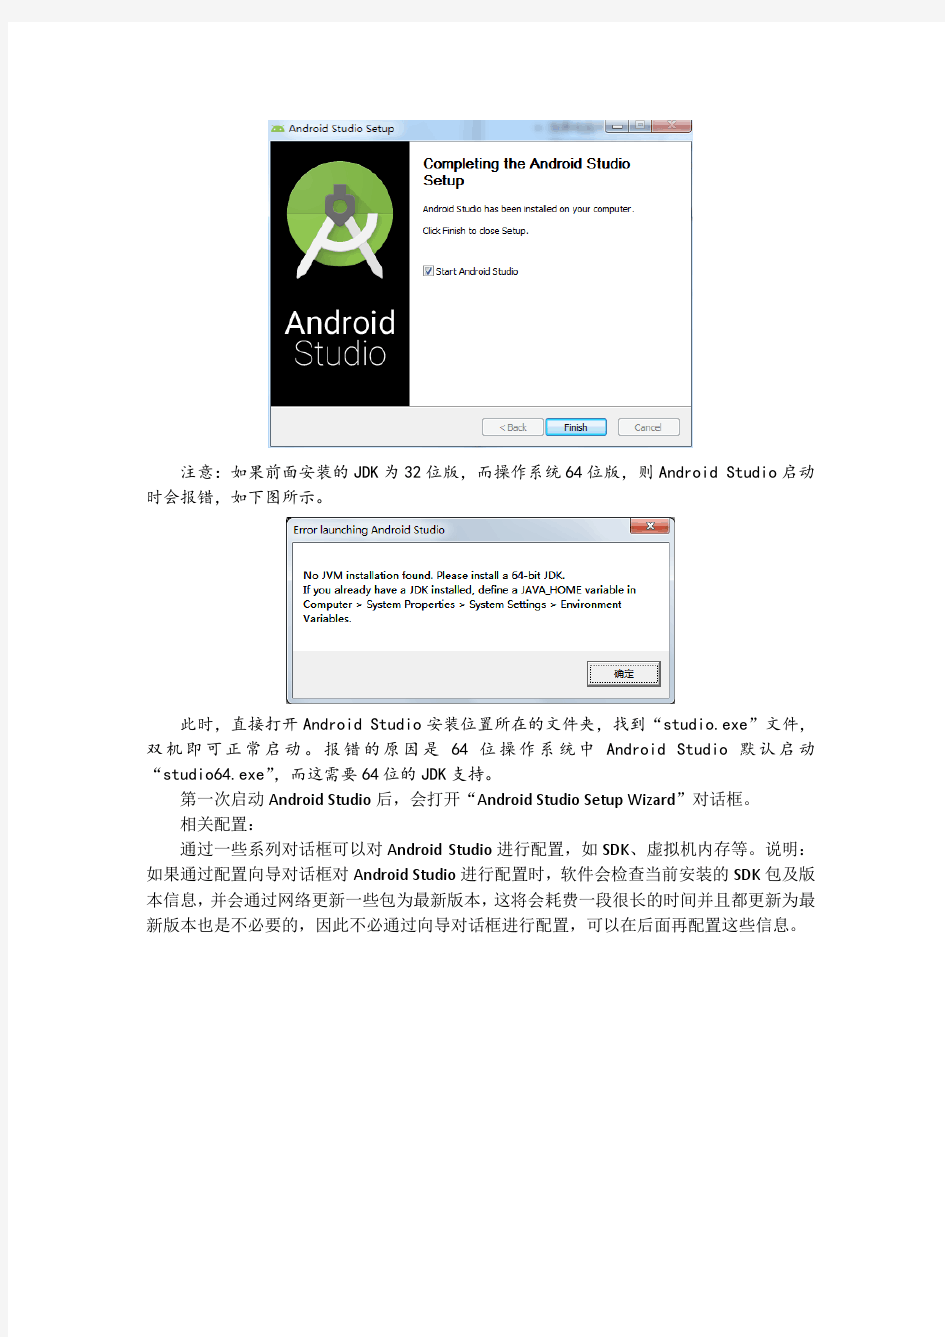 Android开发环境搭建简要说明(Android Studio)